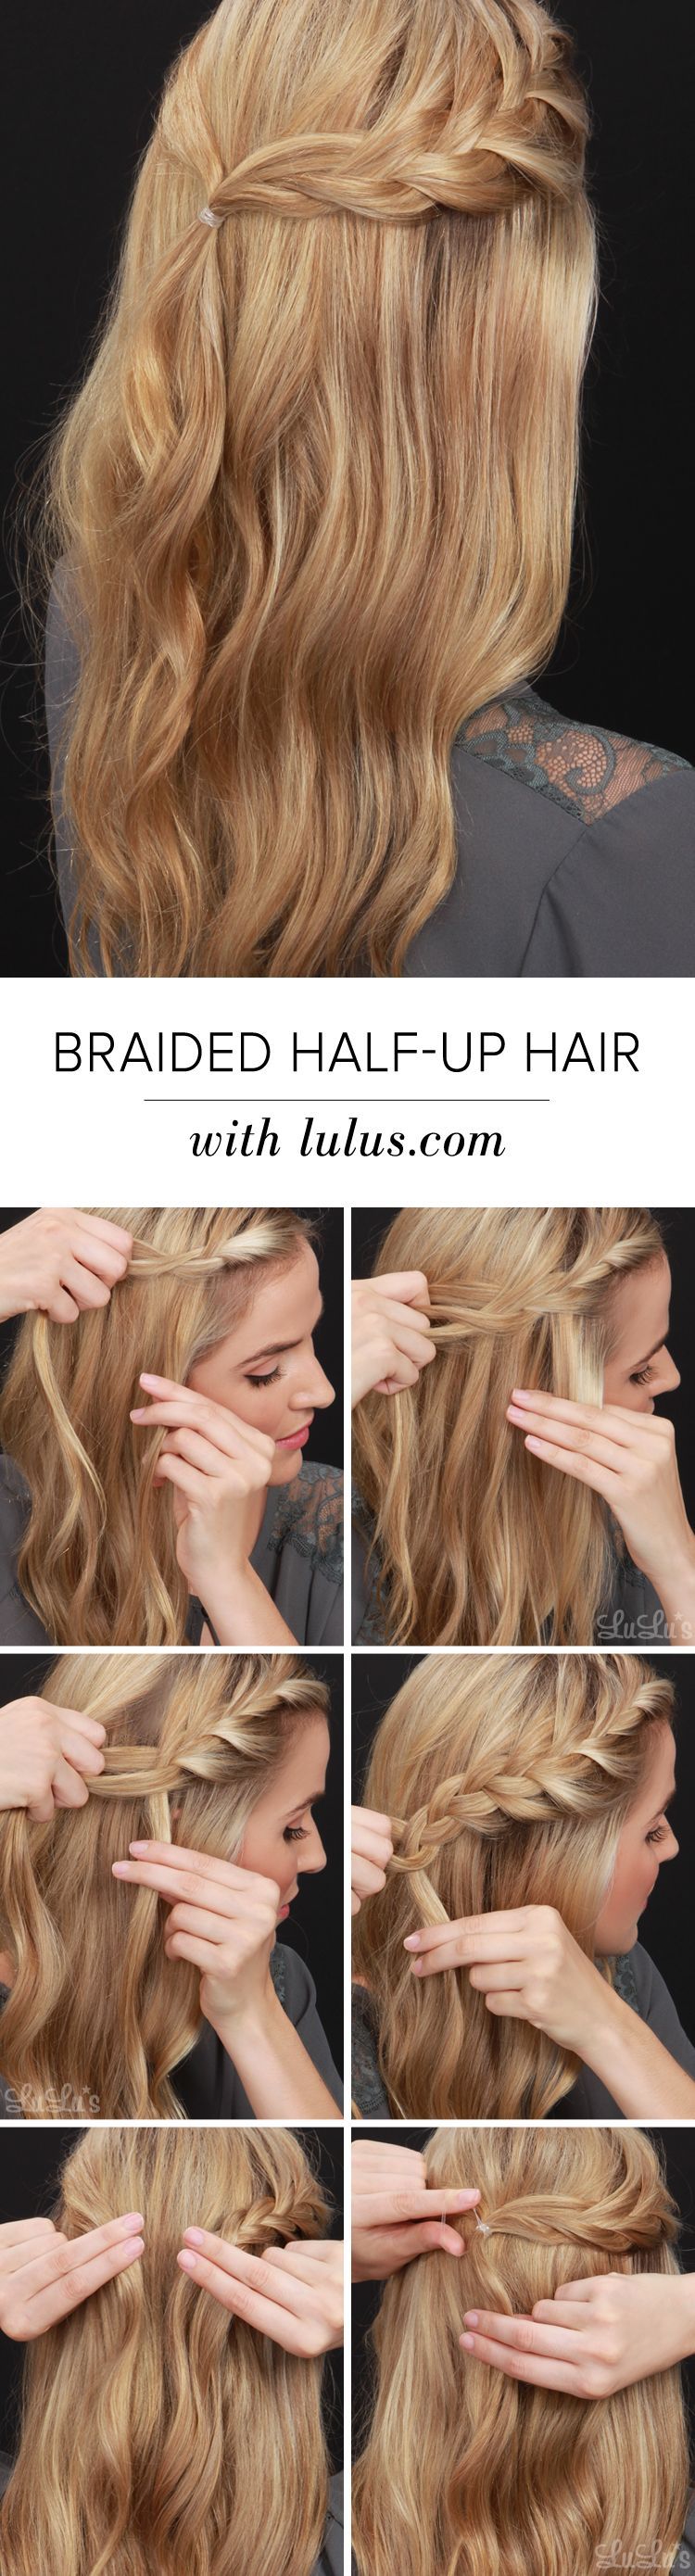 Great for a day at the office, date night, and every other occasion imaginable, our Half-Up Braided Hair Tutorial is so easy to